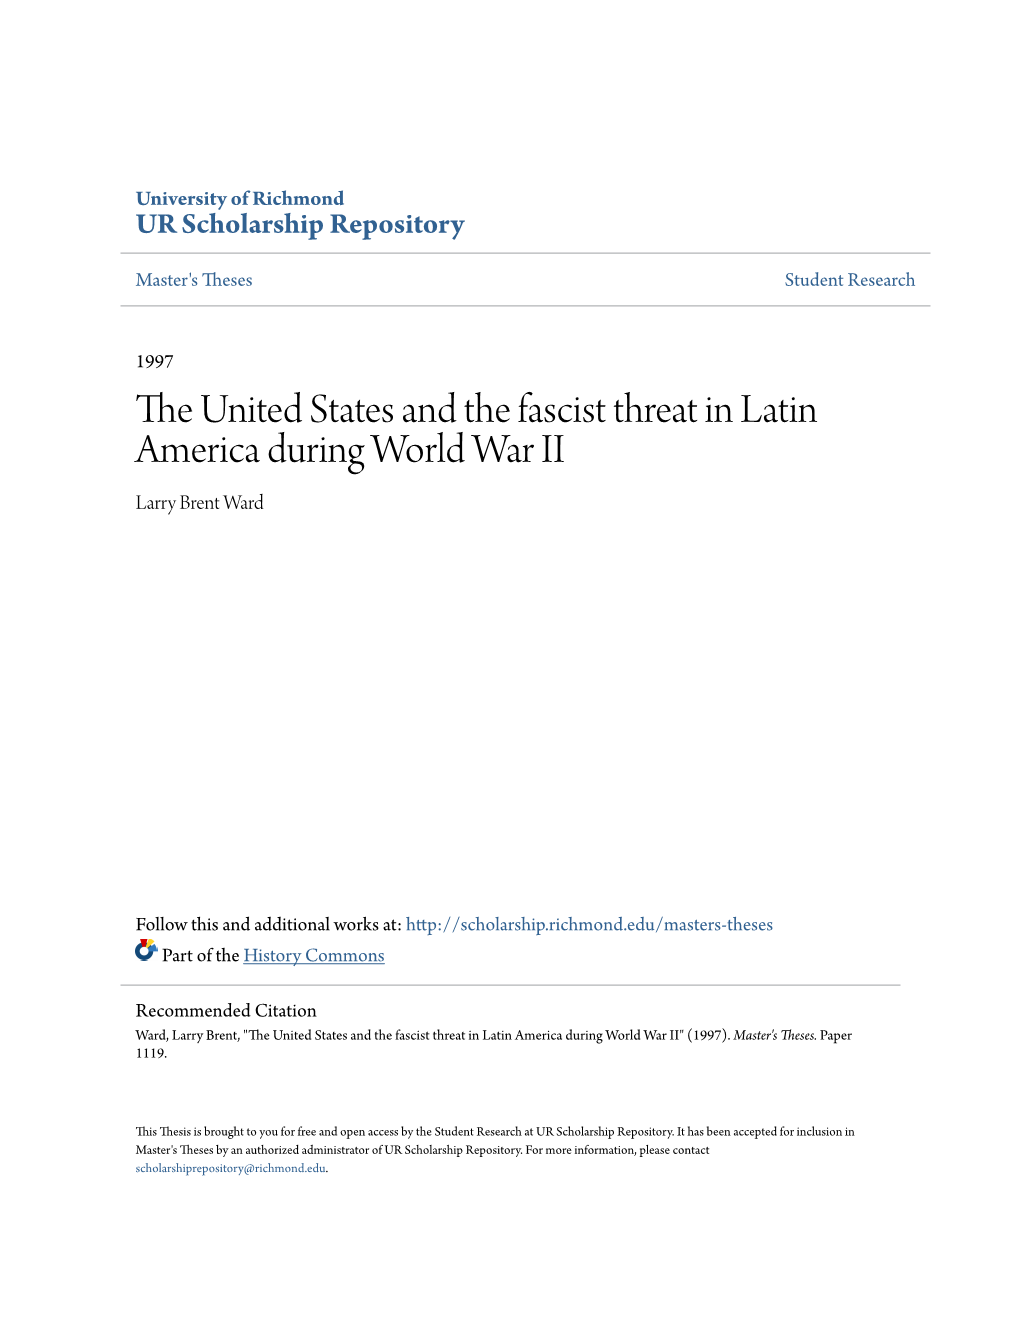 The United States and the Fascist Threat in Latin America During World